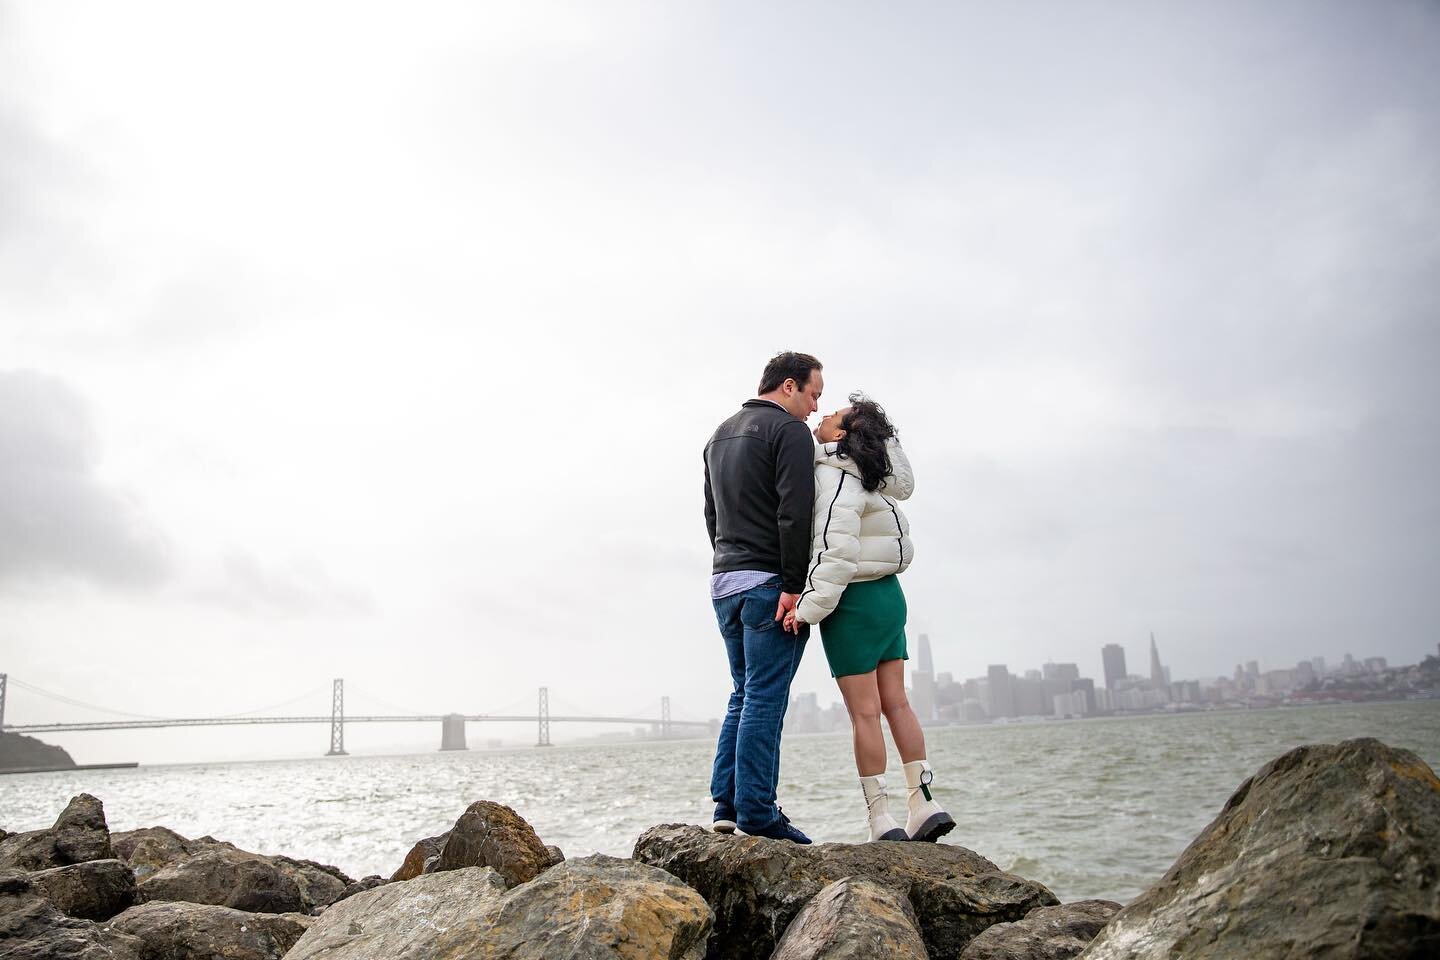 A very happy weekend for these two 💍💕😍

#proposal #shesaidyes #shesaidyes💍 #engaged #engagement #engagementphotos #sanfrancisco #sf #treasureisland #willyoumarryme #sanfranciscophotographer #bayarea #bayareaphotographer #bayareaphotography #photo